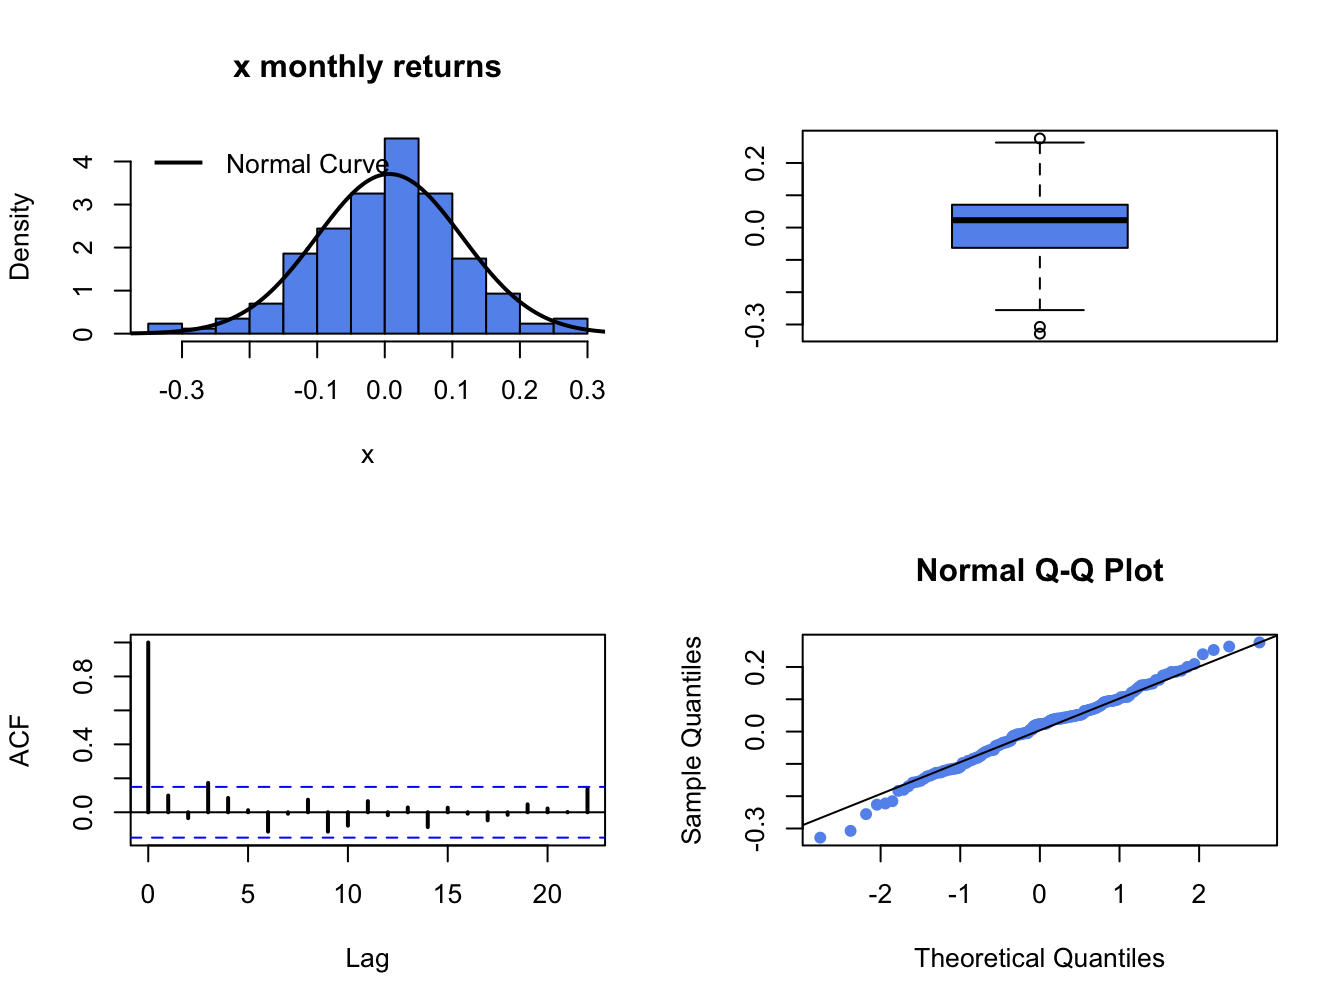 Graphical descriptive statistics for the Monte Carlo simulated returns on Microsoft.